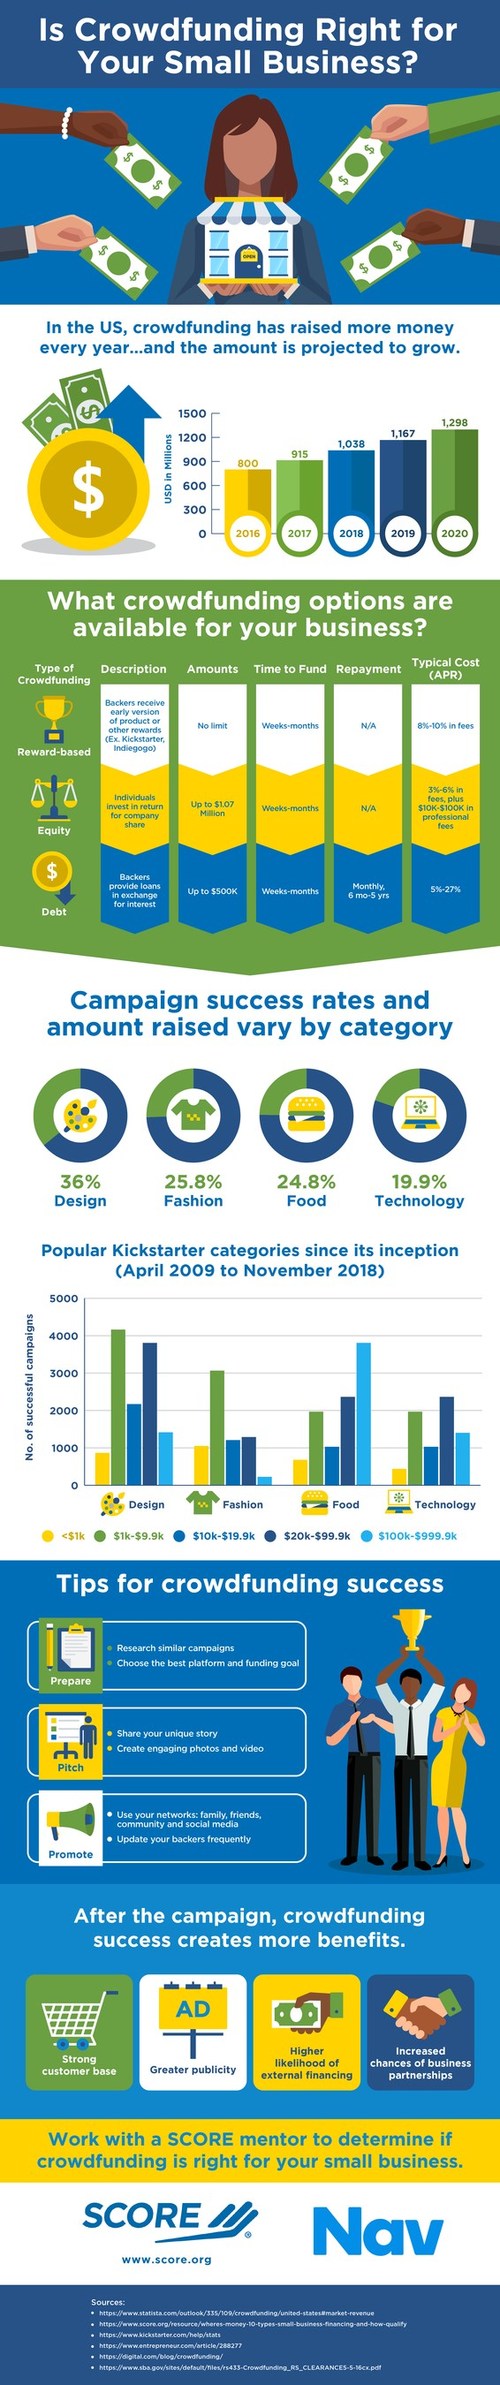 Small businesses are increasingly relying on crowdfunding, according to new survey data from SCORE, the nation’s largest network of volunteer, expert business mentors. In 2018, U.S. businesses raised $1.04 billion, a significant increase from the $915 million raised in 2017. SCORE’s latest infographic, sponsored by Nav, details recent trends and projections in crowdfunding for small businesses.